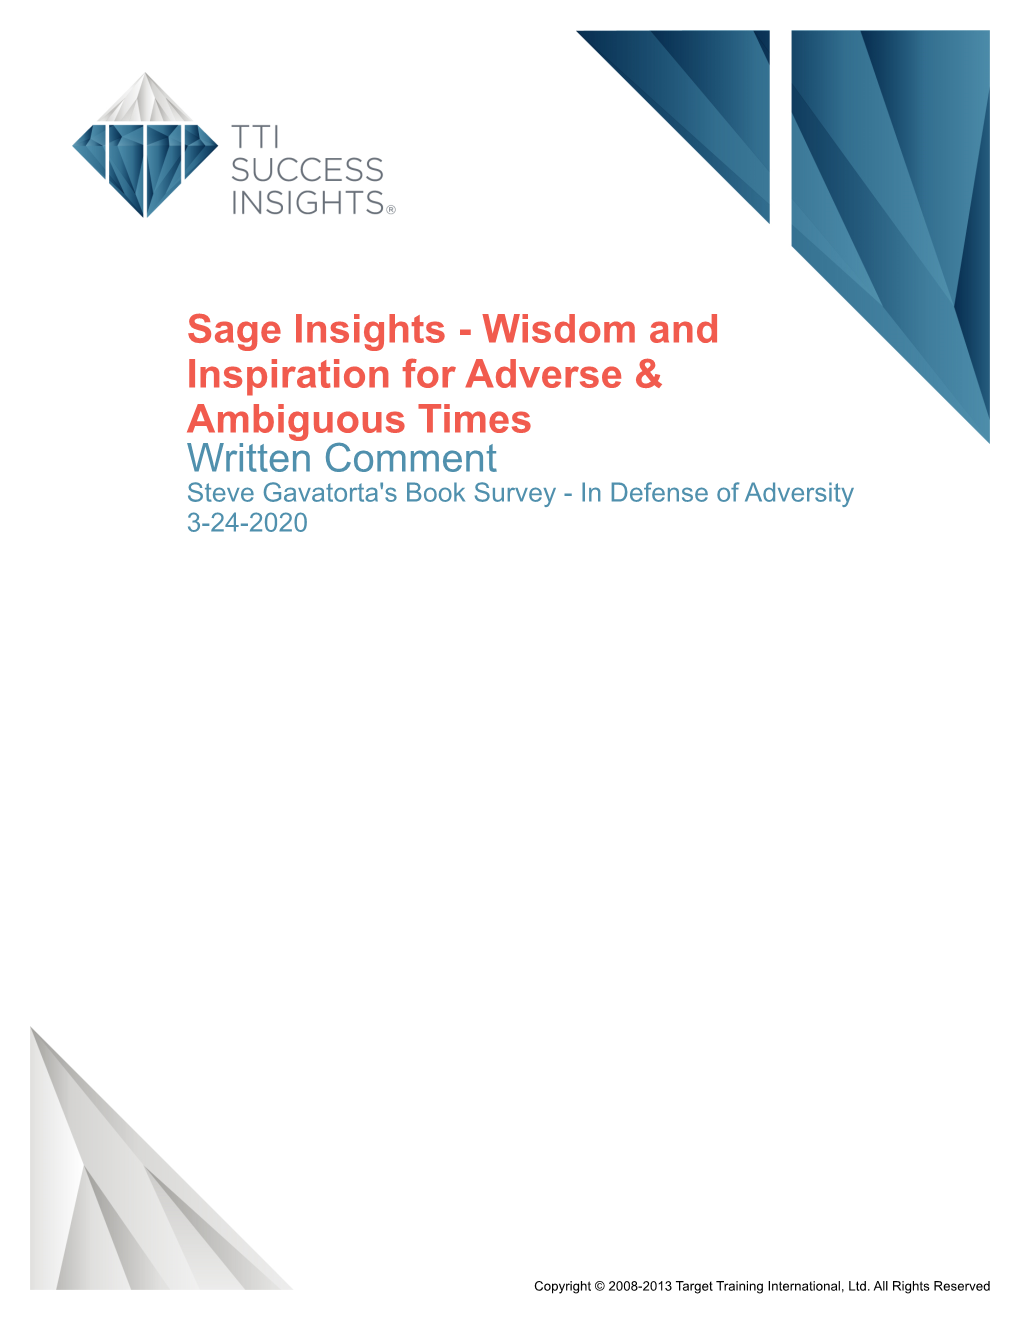 Sage Insights - Wisdom and Inspiration for Adverse & Ambiguous Times Written Comment Steve Gavatorta's Book Survey - in Defense of Adversity 3-24-2020